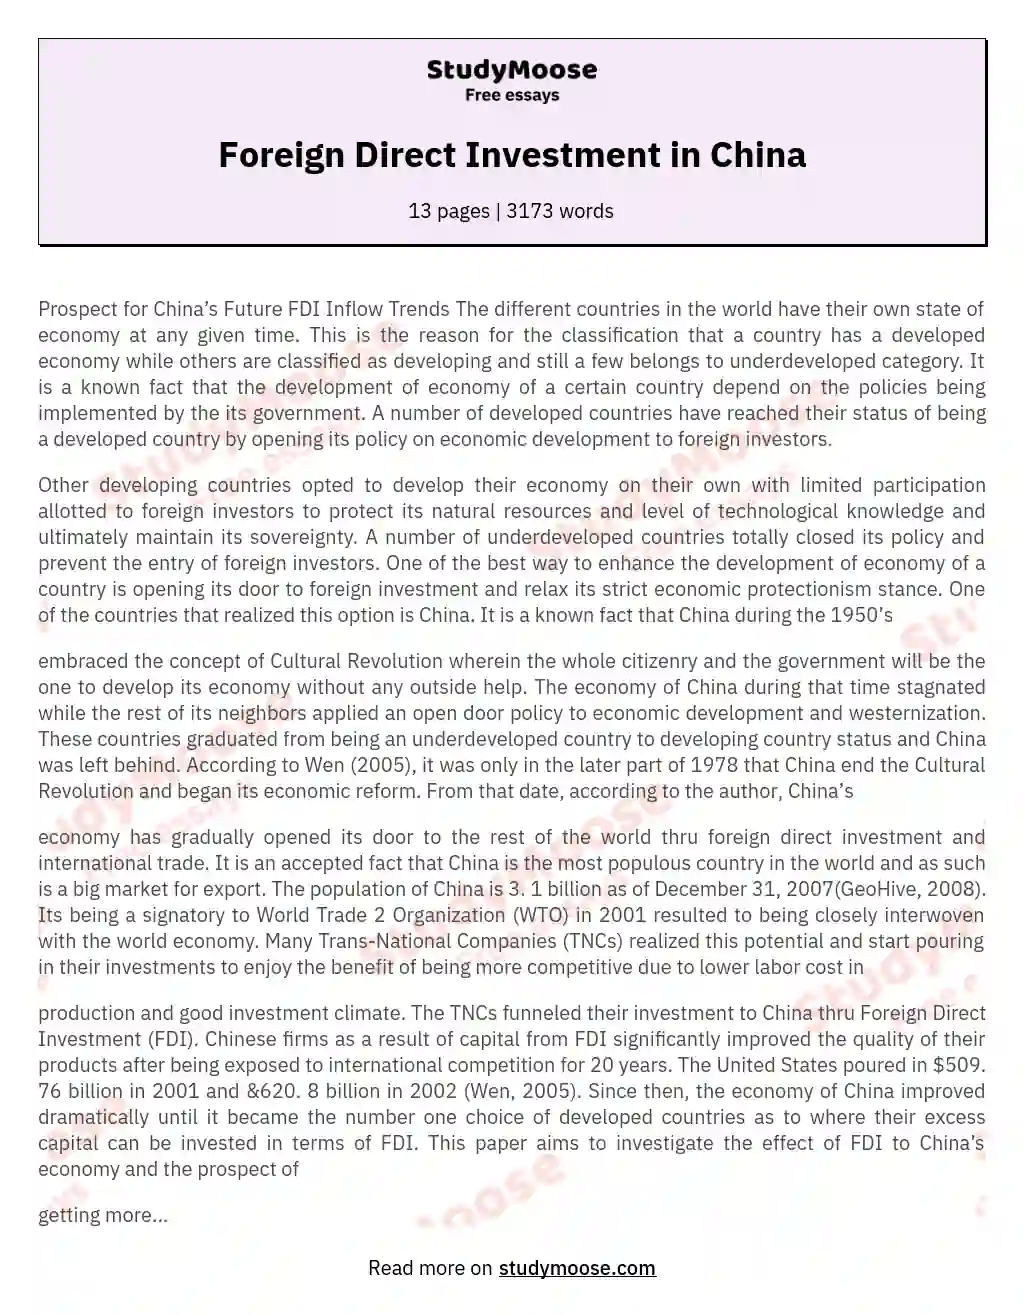 Foreign Direct Investment in China essay